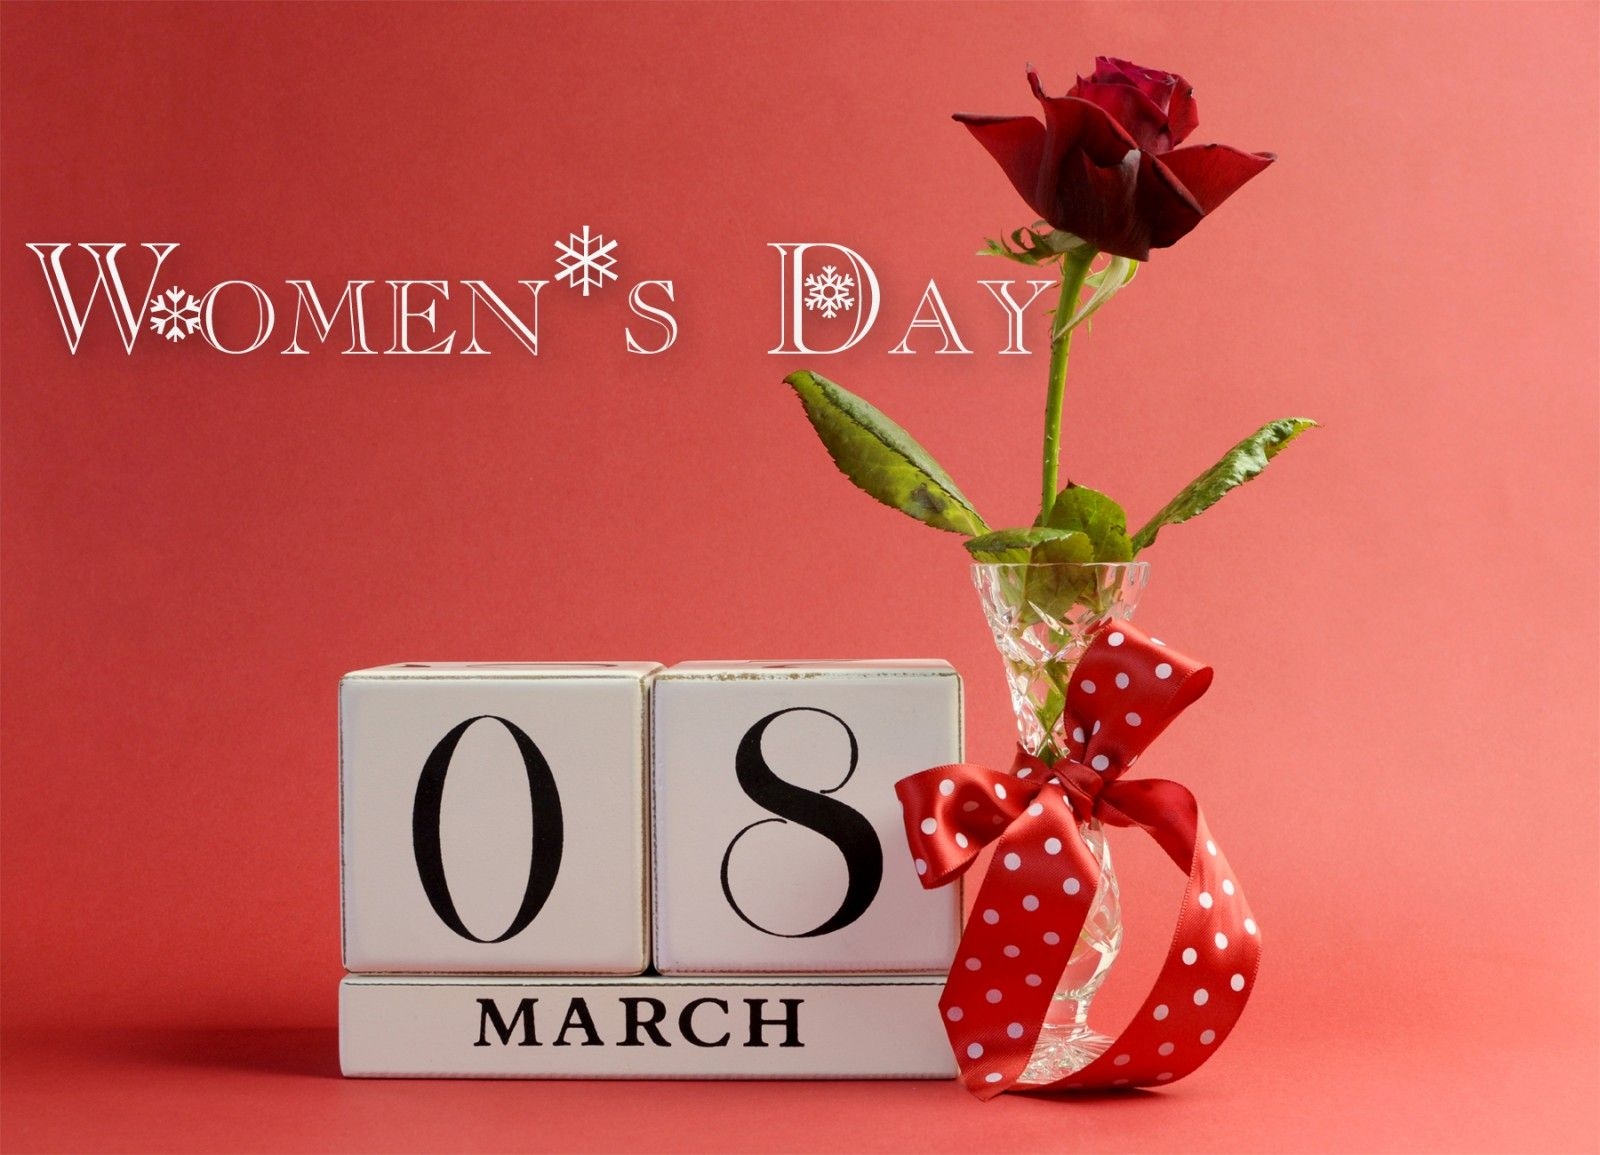 Top Gifts for Wife and Girlfriends on International Women’s Day (March 8)